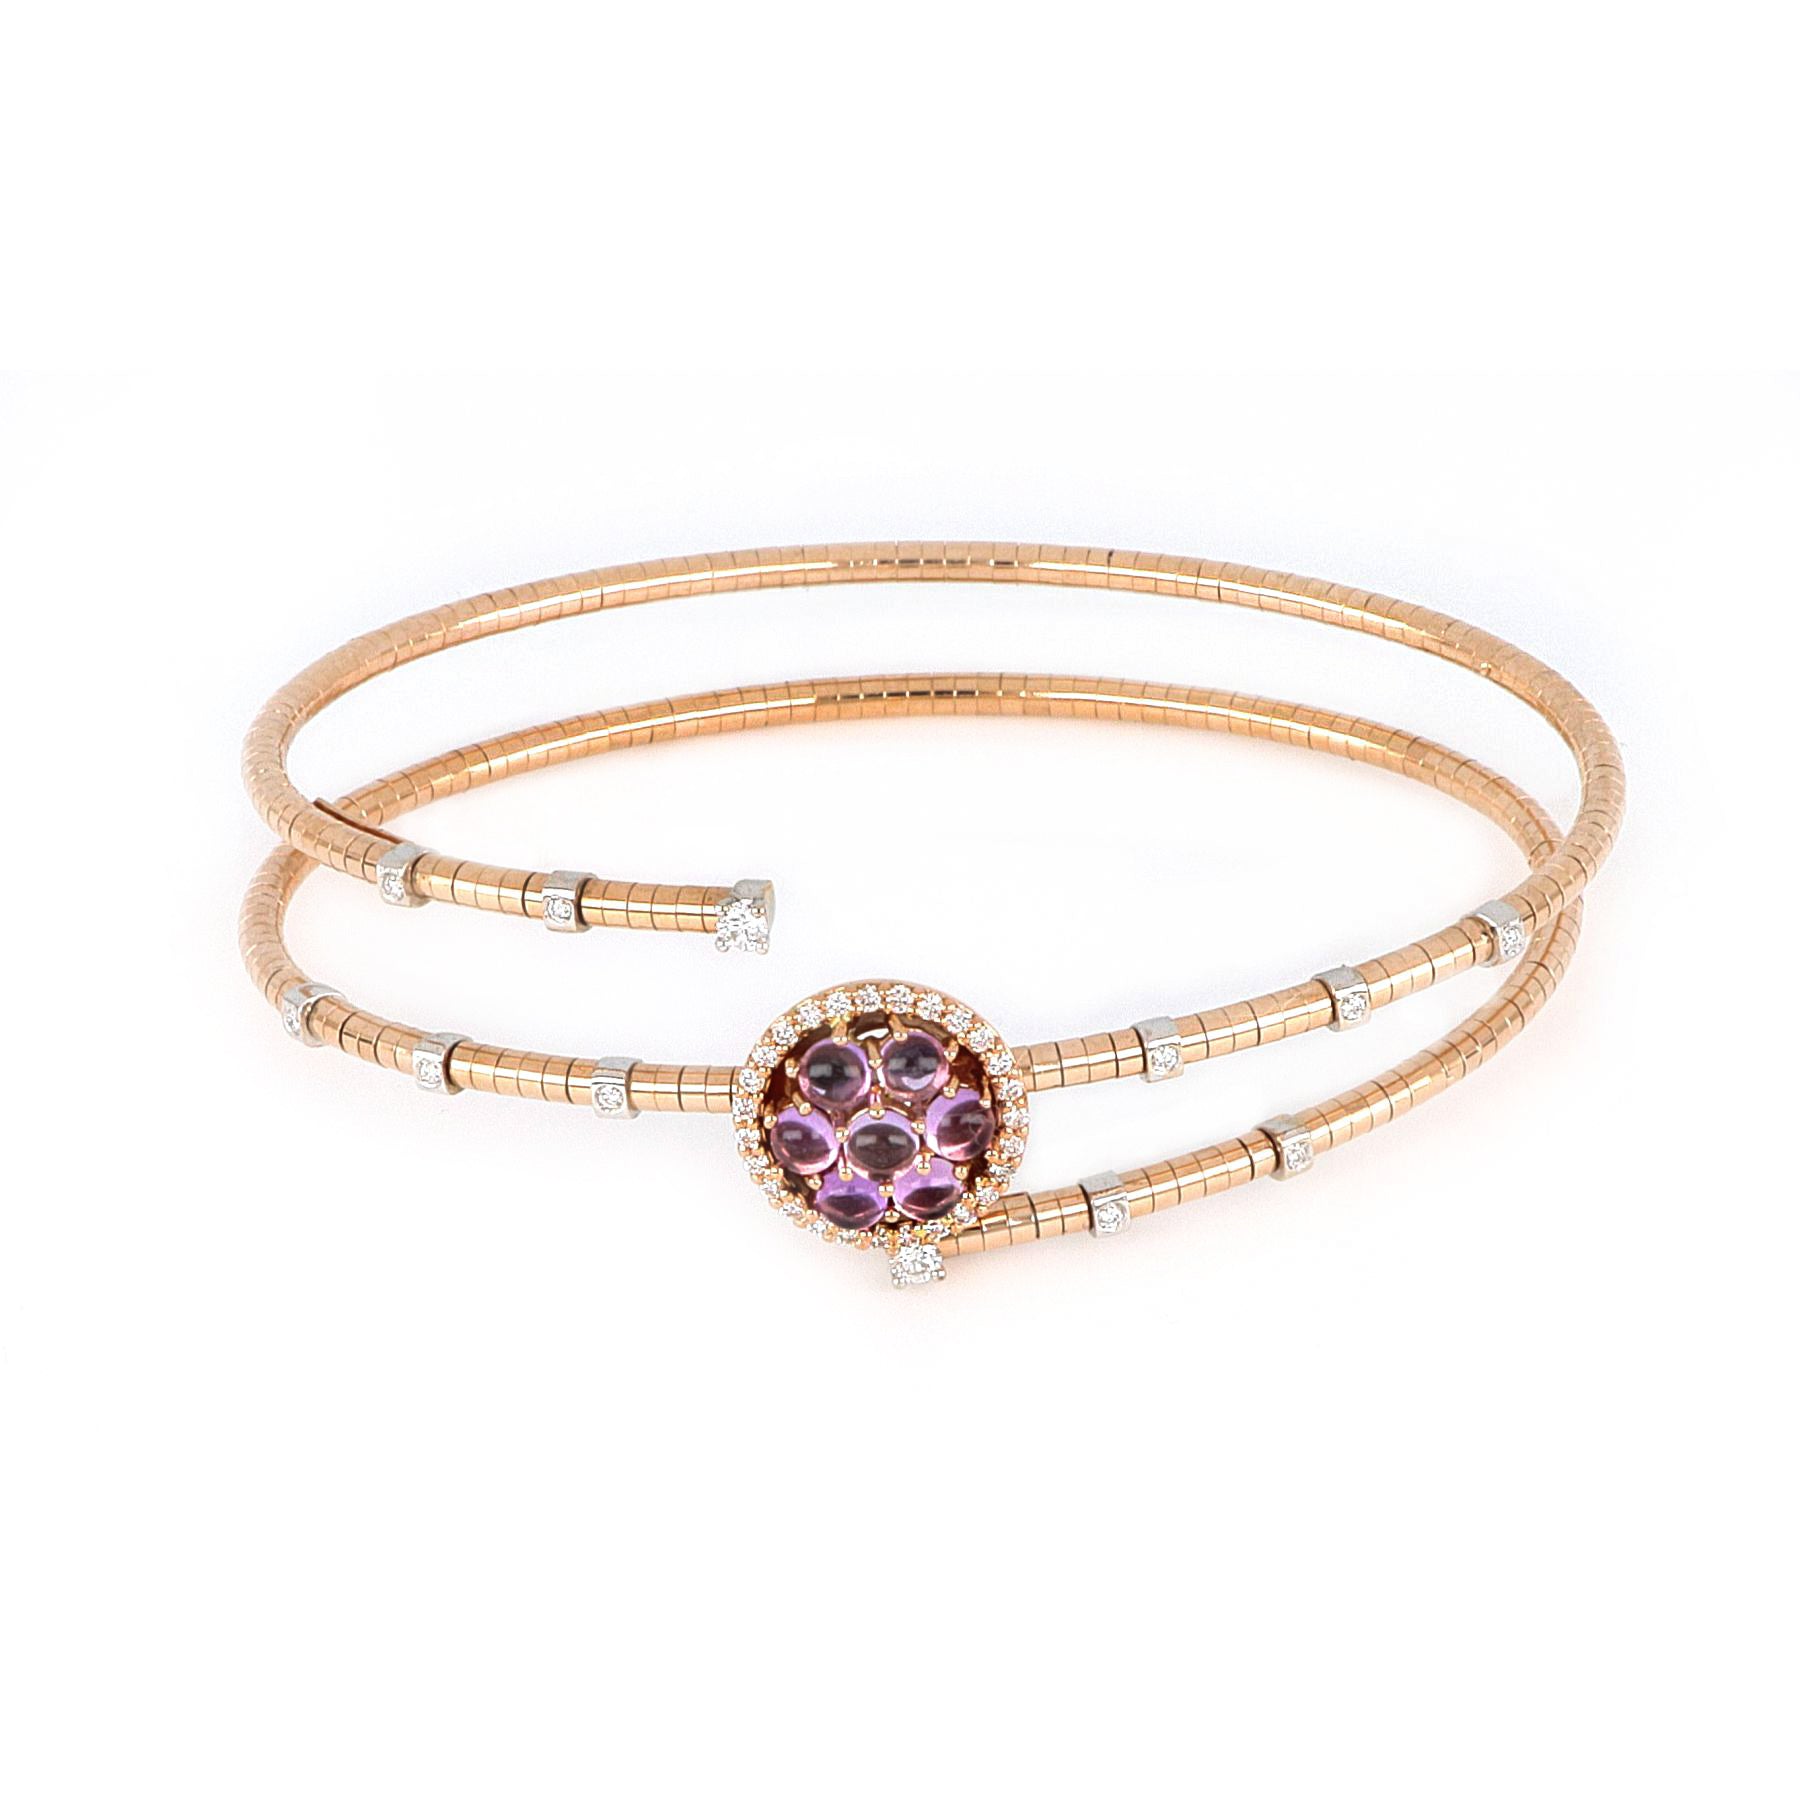 Video Rose And White Gold Bracelet With Amethyst And Diamonds